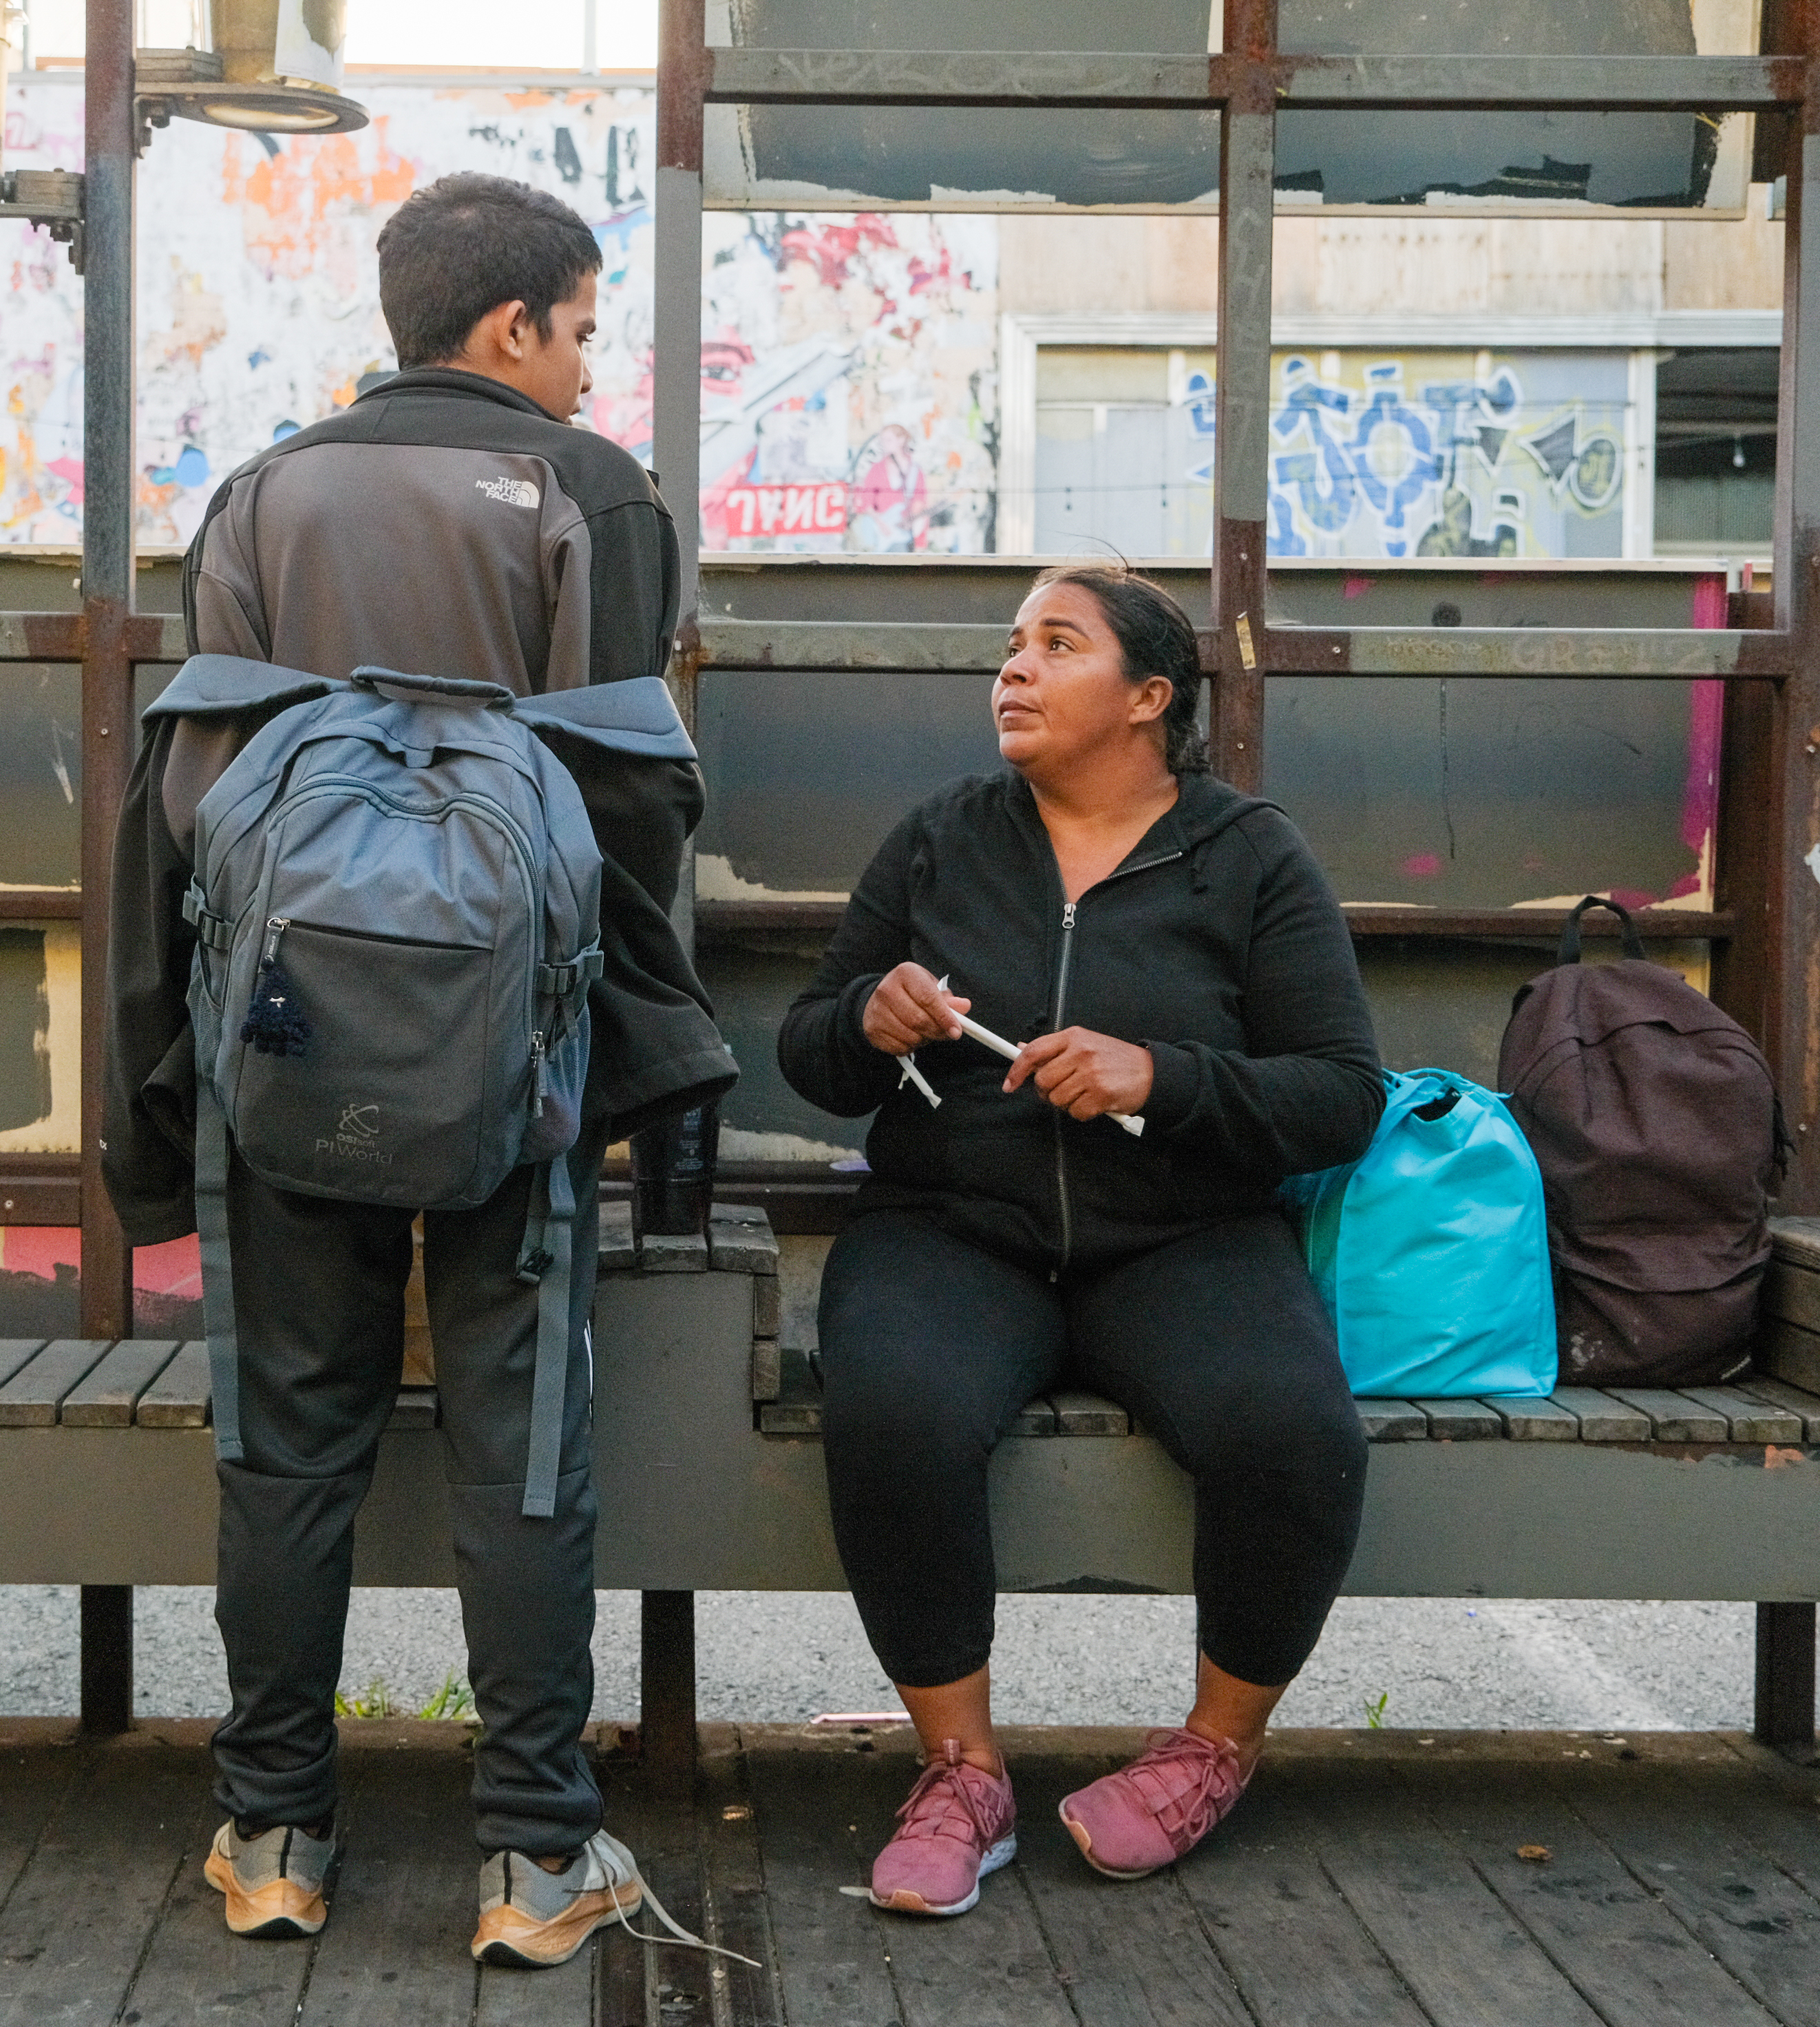 A boy with a backpack facing a seated woman with headphones, both engaging in conversation at a graffiti-lined train station.